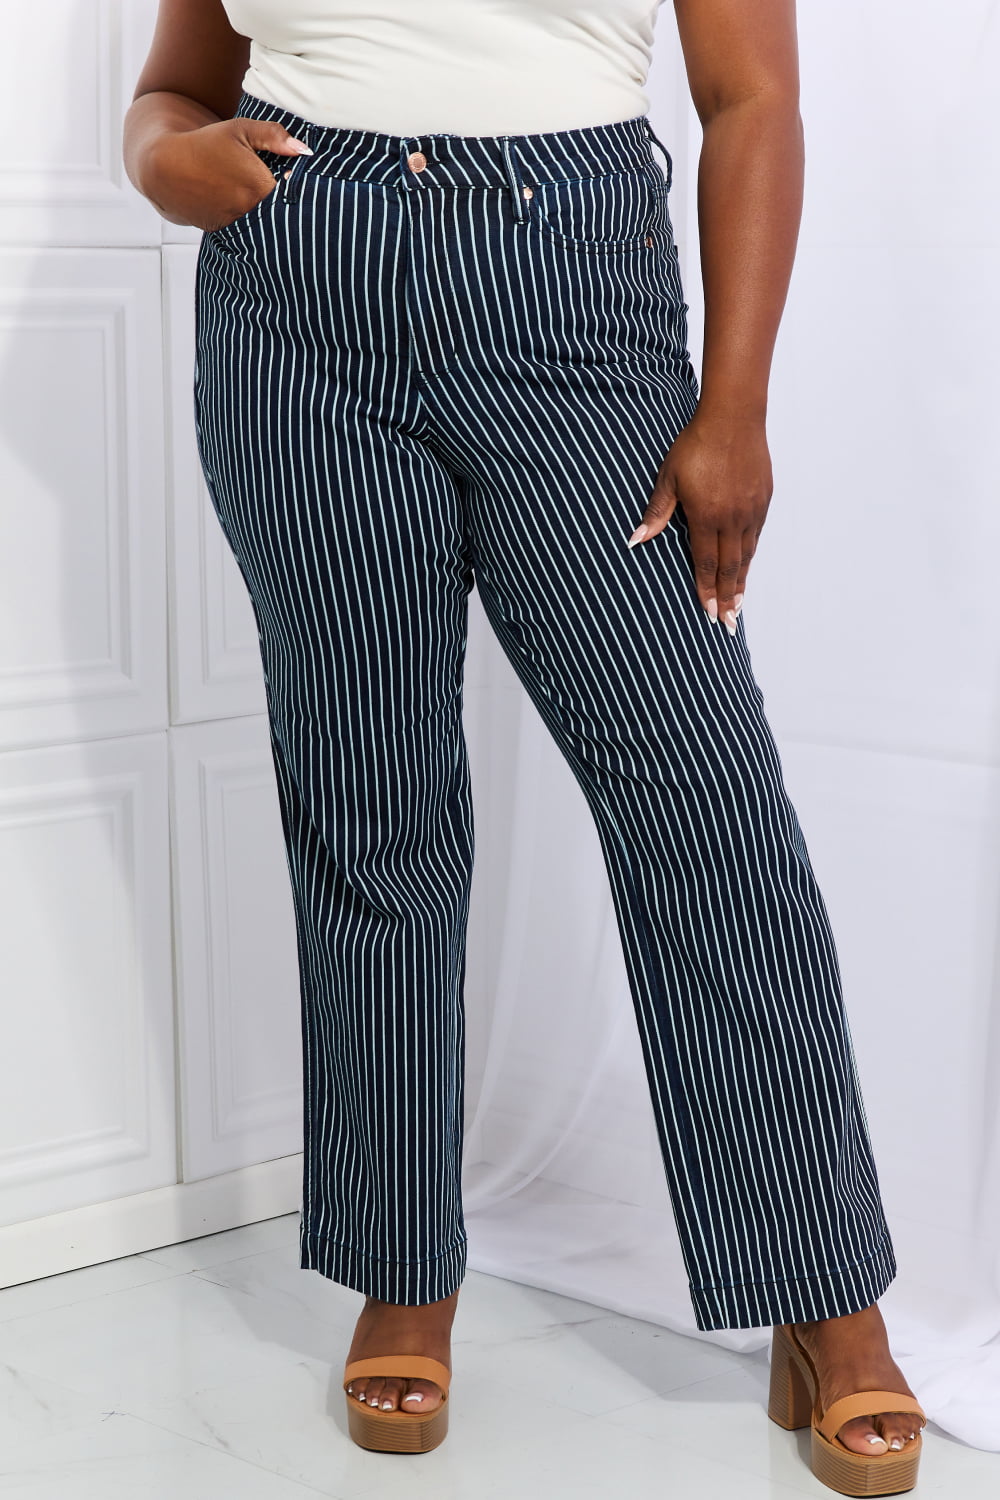 Judy Blue Cassidy Striped Straight Jeans